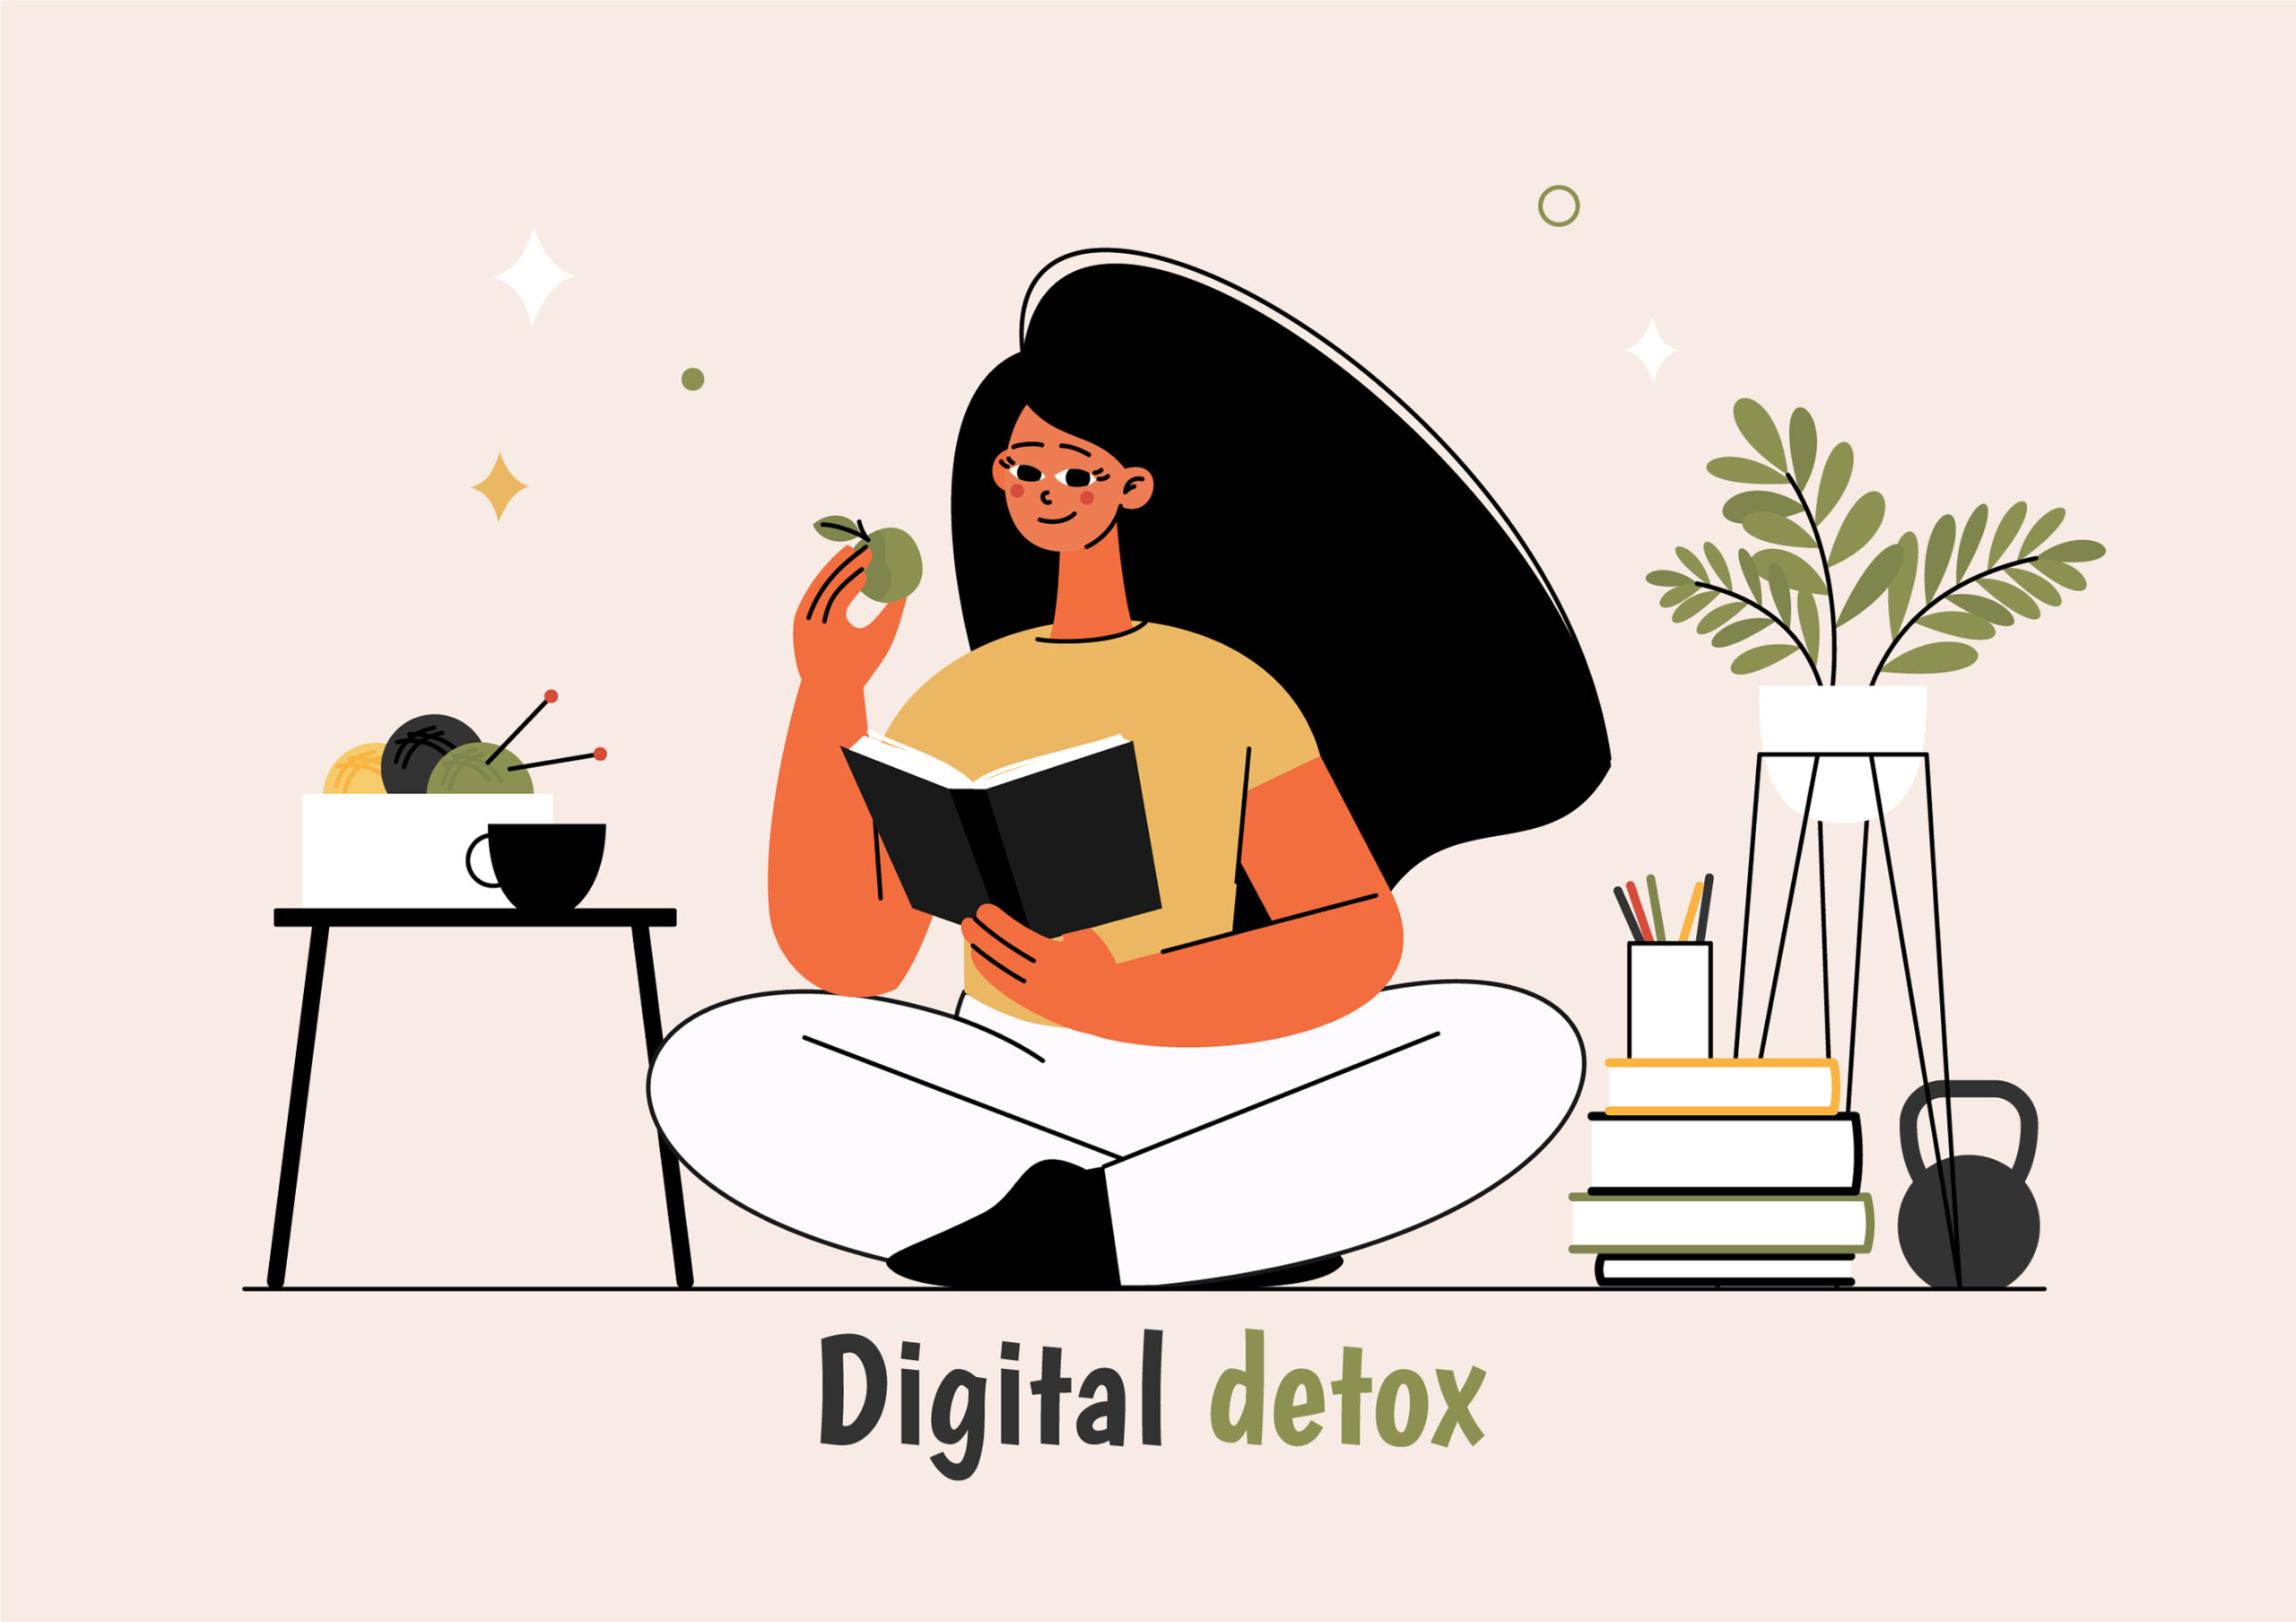 Digital Detox 101: Mental Health Benefits of Disconnecting from Technology